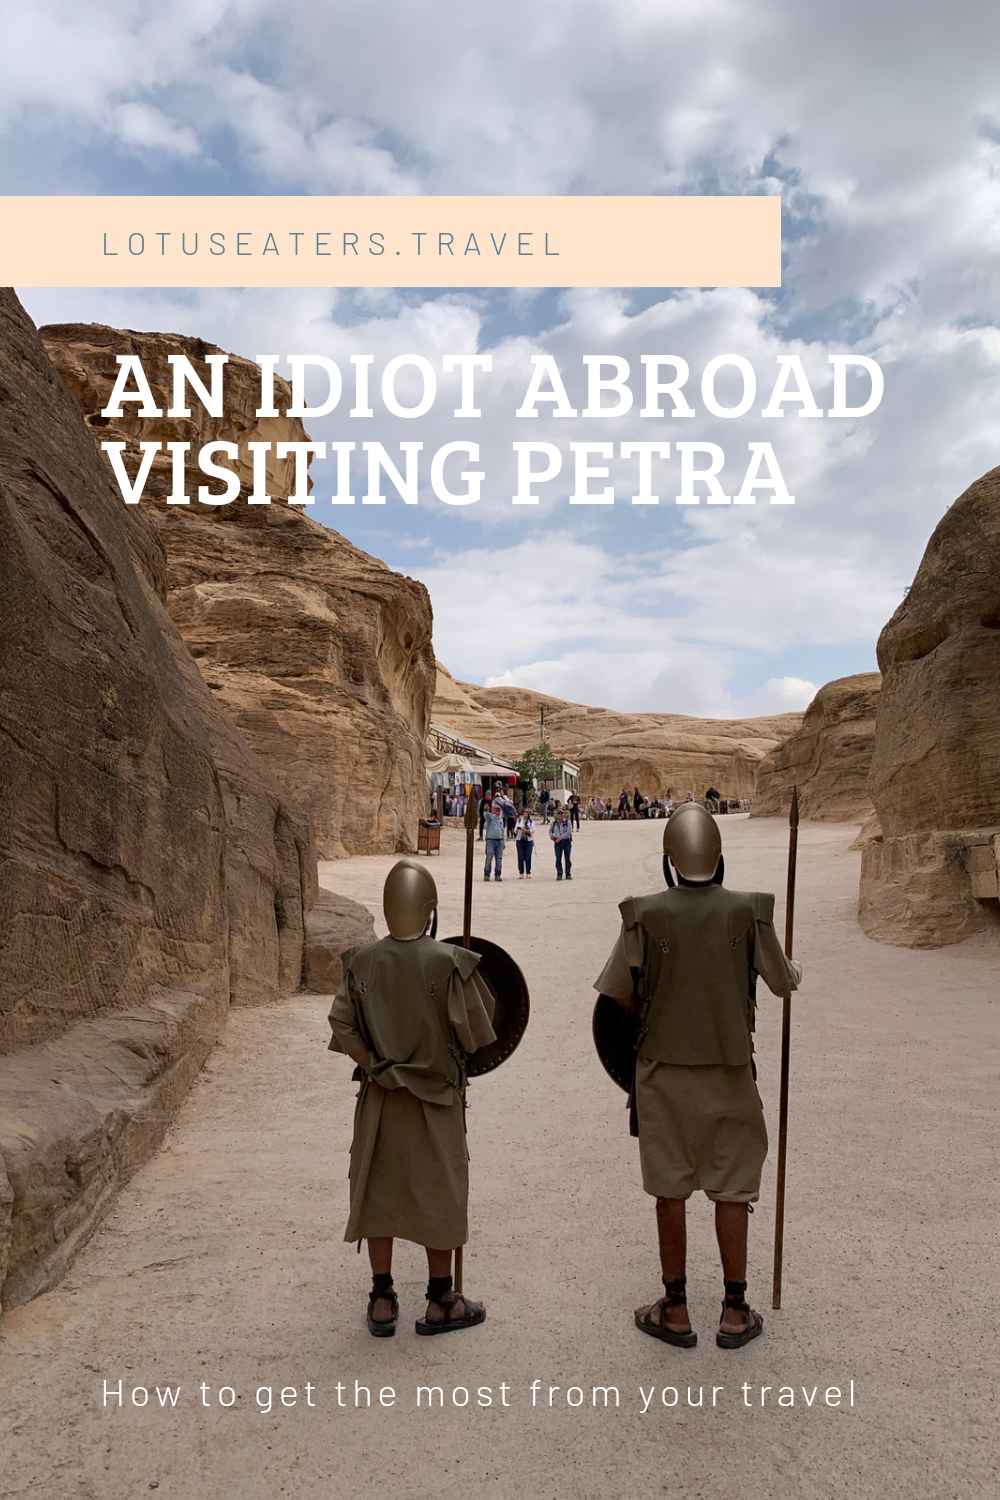 How to visit Petra, without looking like an idiot abroad